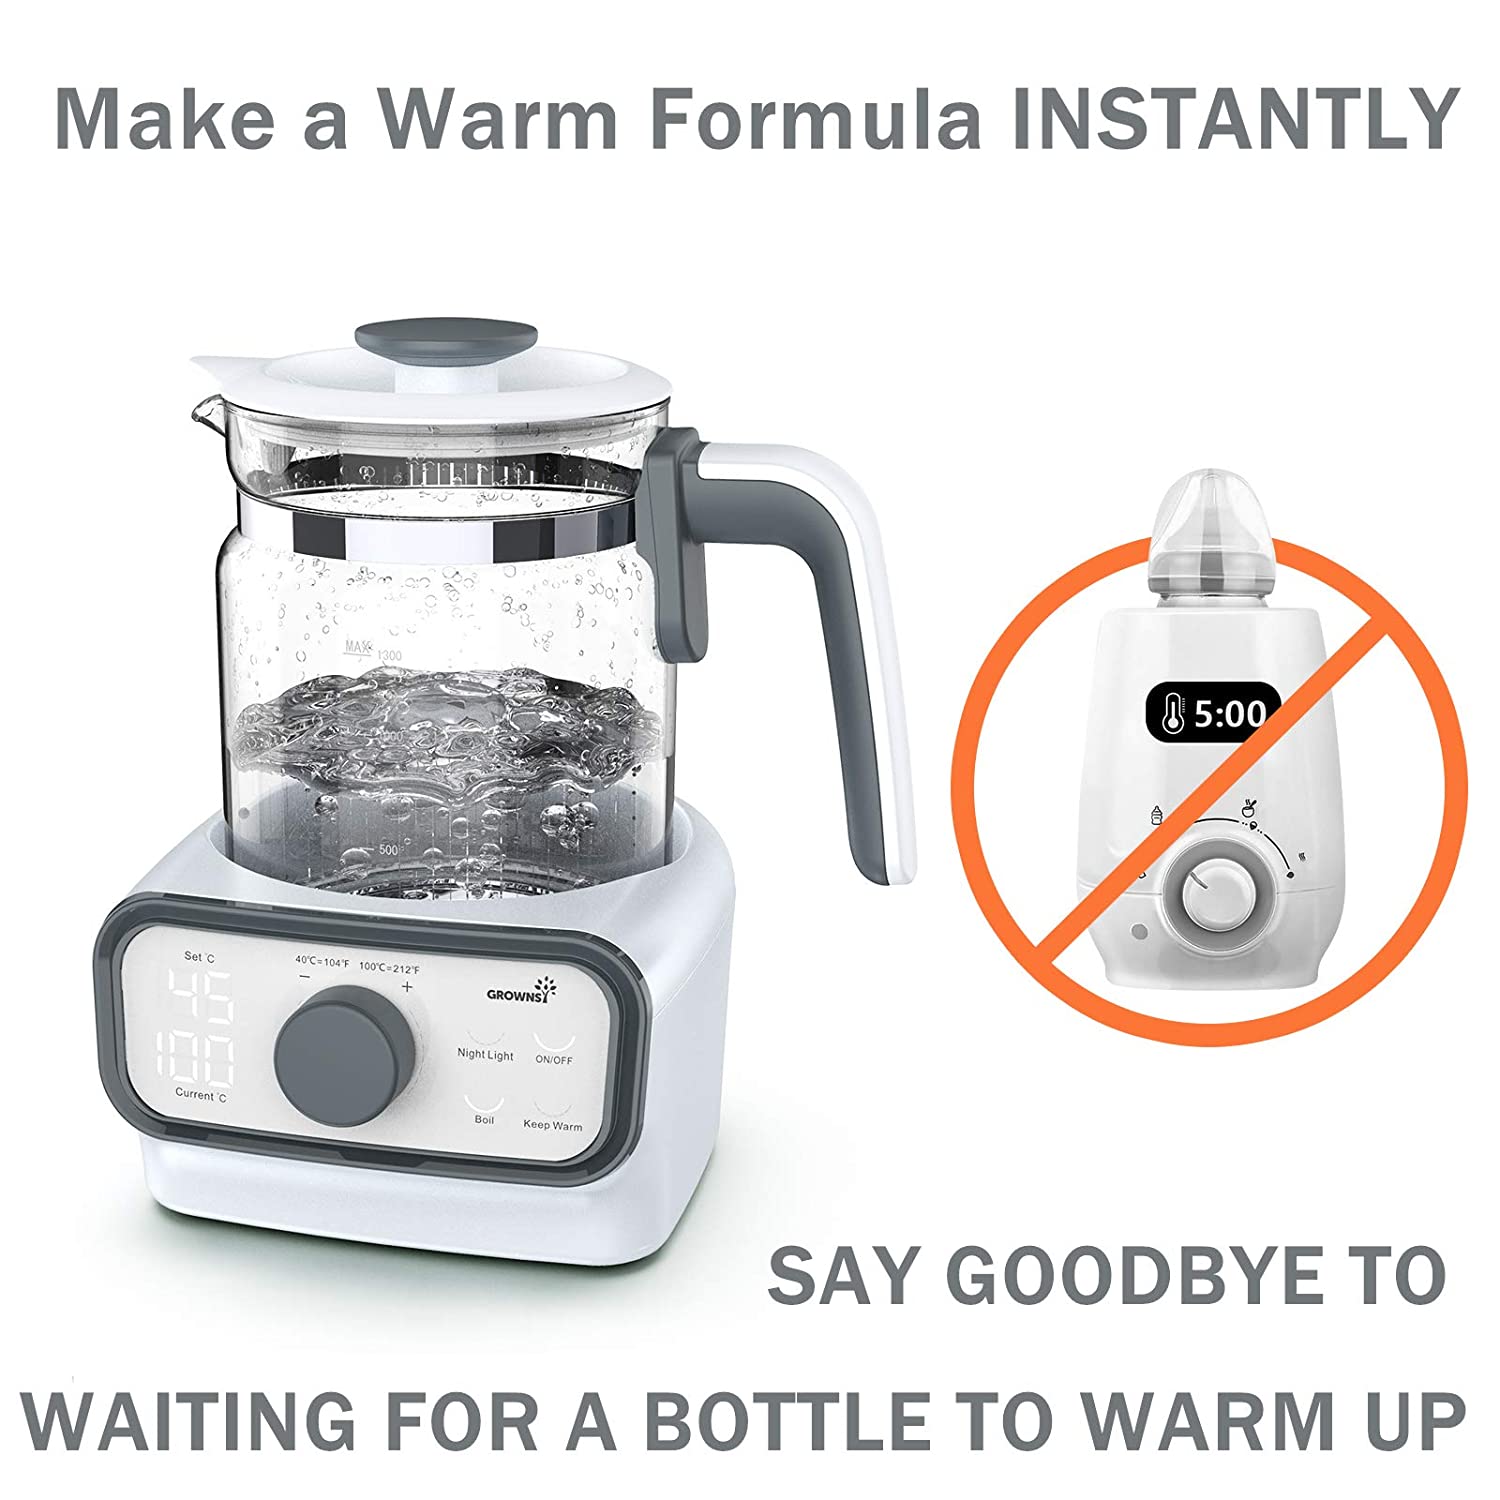 GROWNSY Instant Baby Bottle Warmer Precise 4 Temperatures Control, Night  Light Midnight Feeding, Warm Water Dispenser for Formula in Seconds